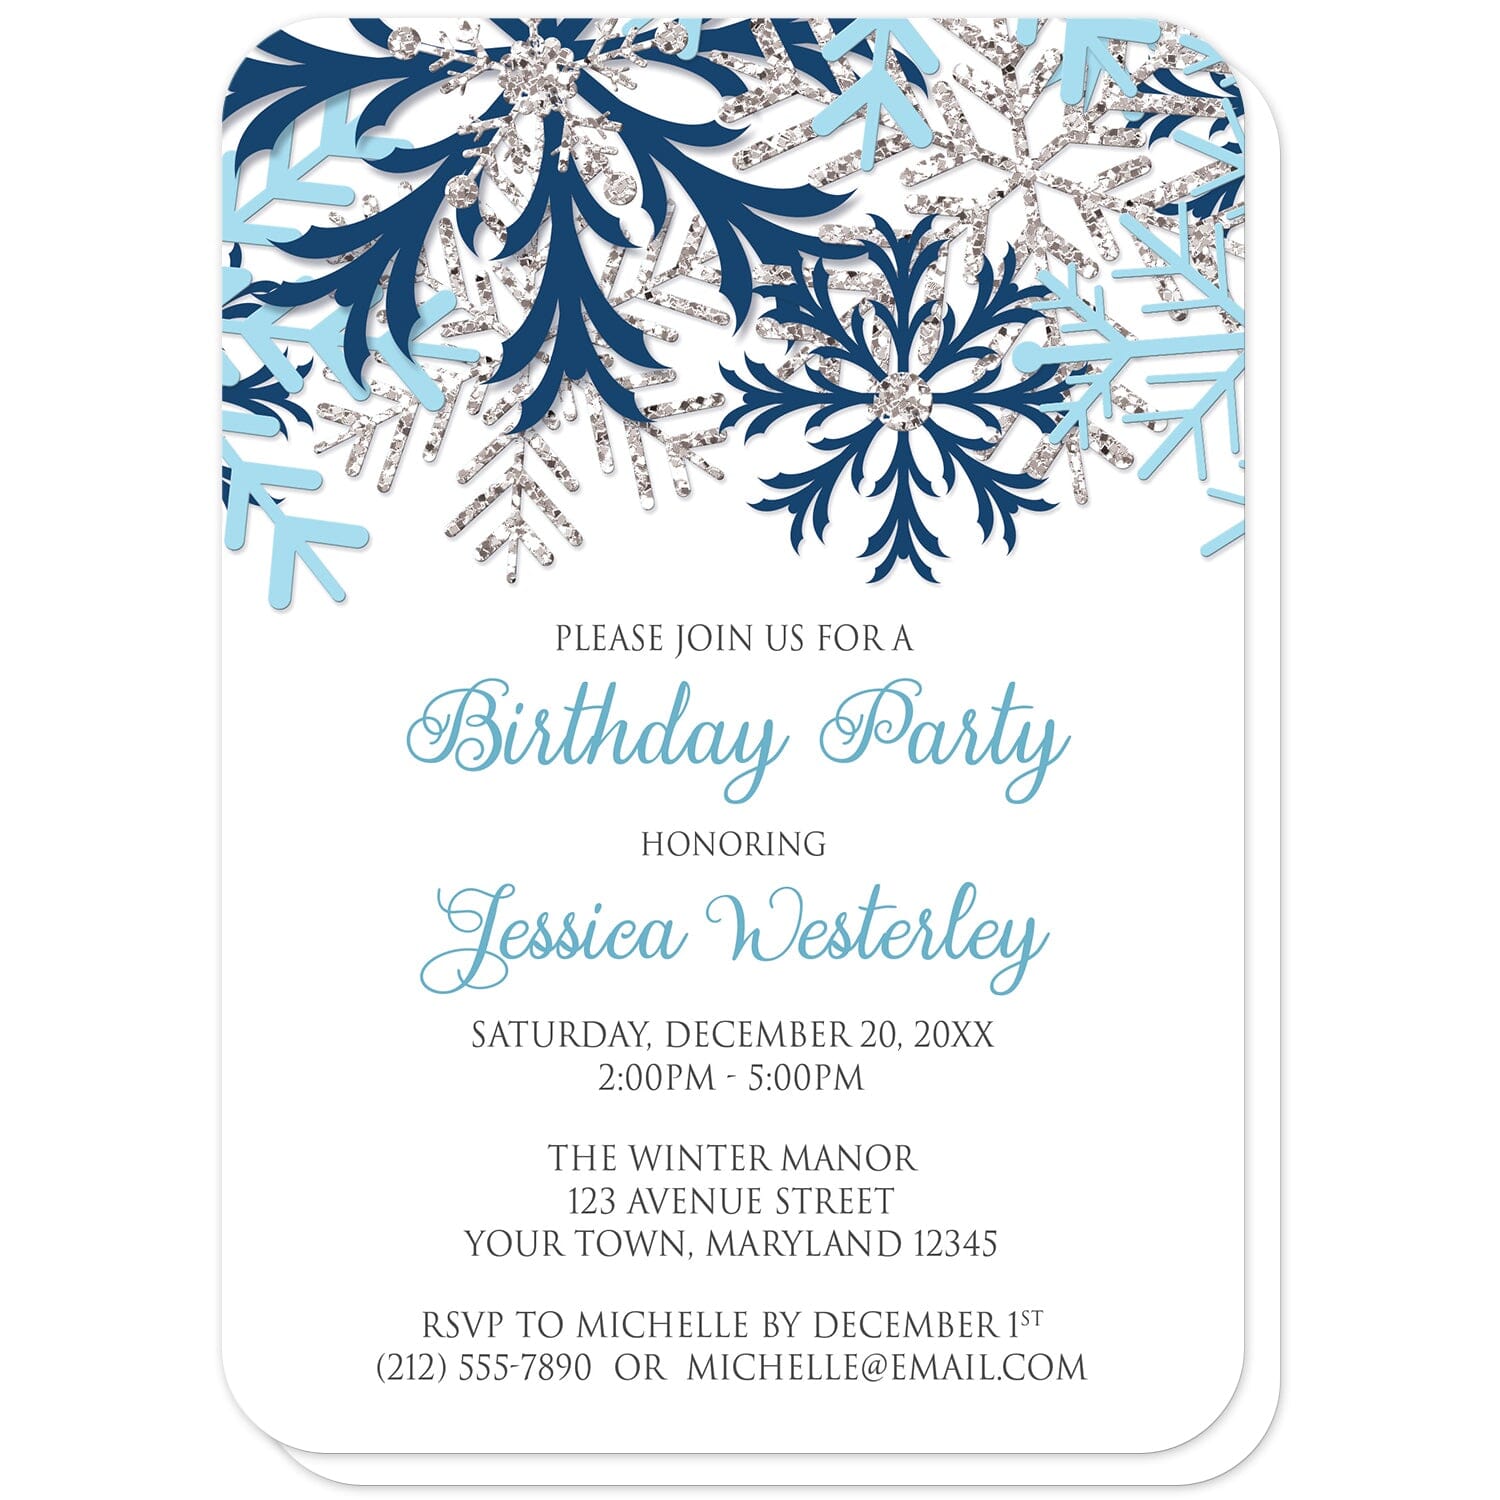 Winter Blue Silver Snowflake Birthday Party Invitations (with rounded corners) at Artistically Invited. Beautiful winter blue silver snowflake birthday party invitations designed with navy blue, aqua blue, and silver-colored glitter-illustrated snowflakes along the top over a white background. Your personalized birthday celebration details are custom printed in blue and gray below the pretty snowflakes.